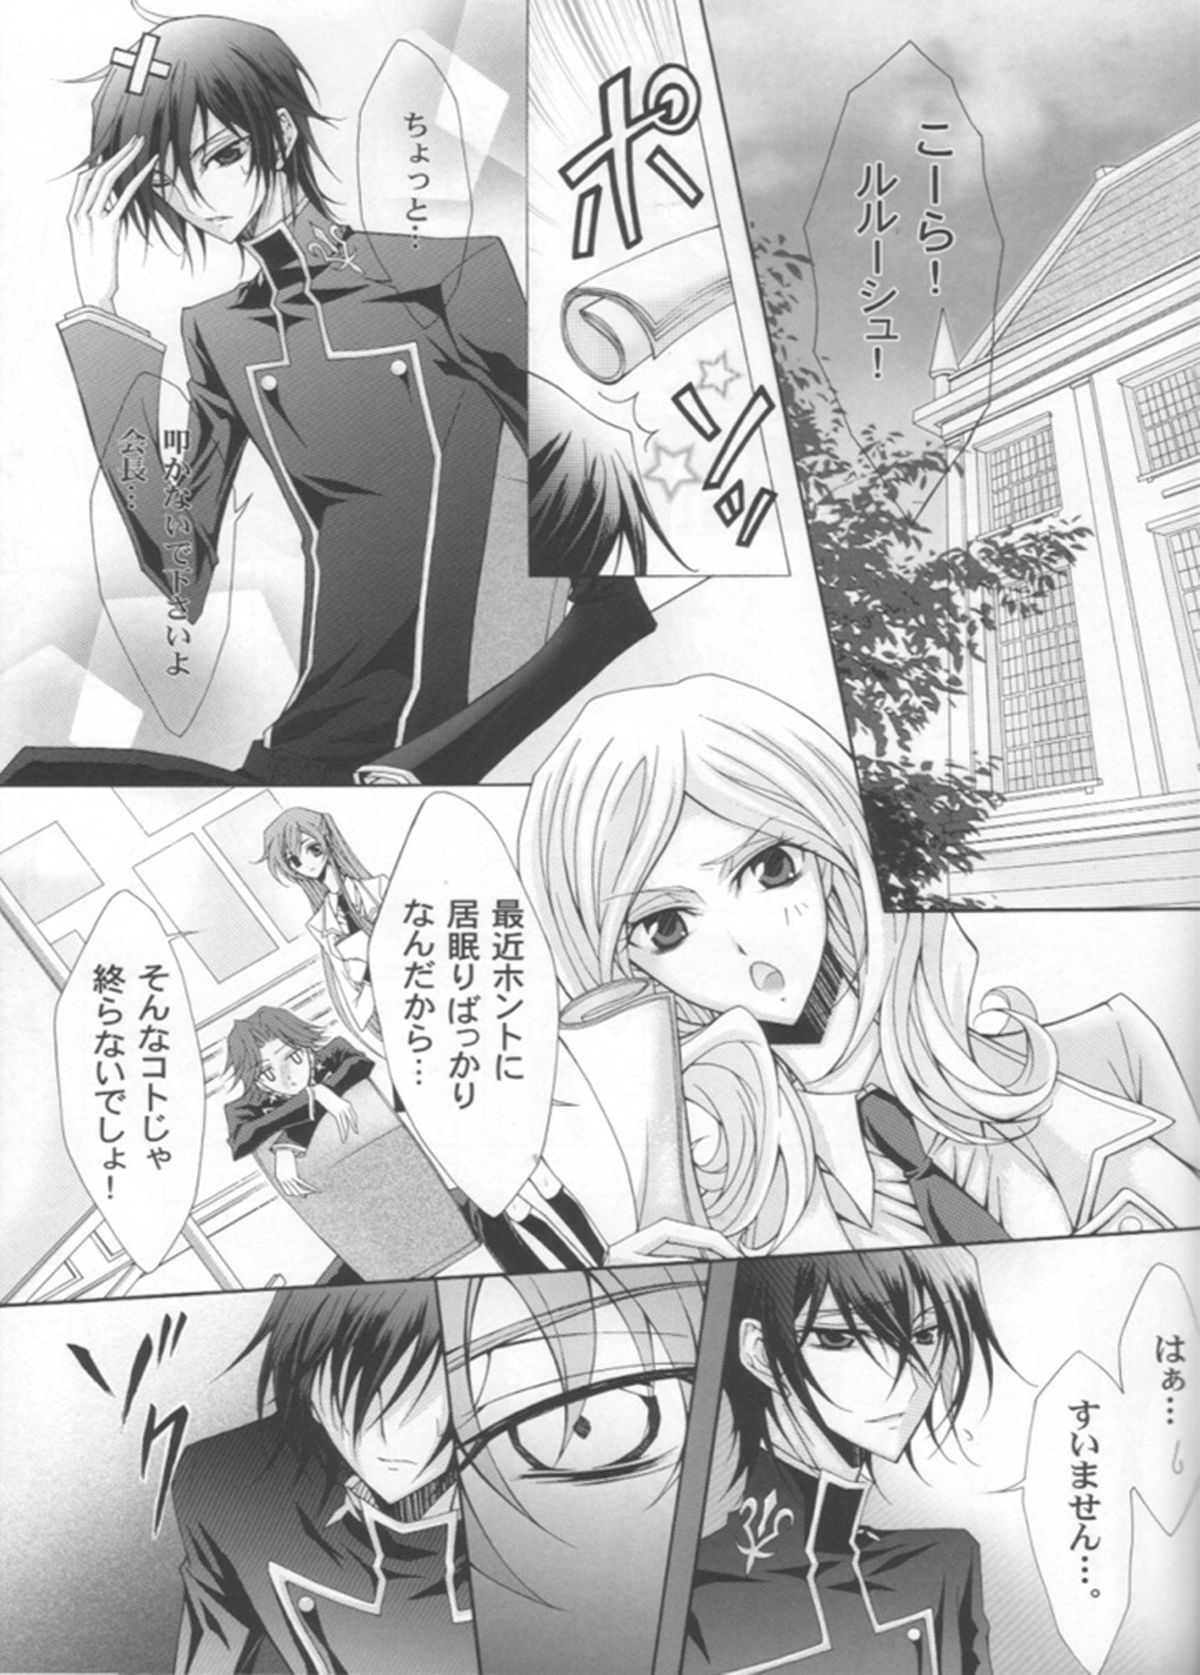 LUNA (CODE GEASS: Lelouch of the Rebellion) page 2 full